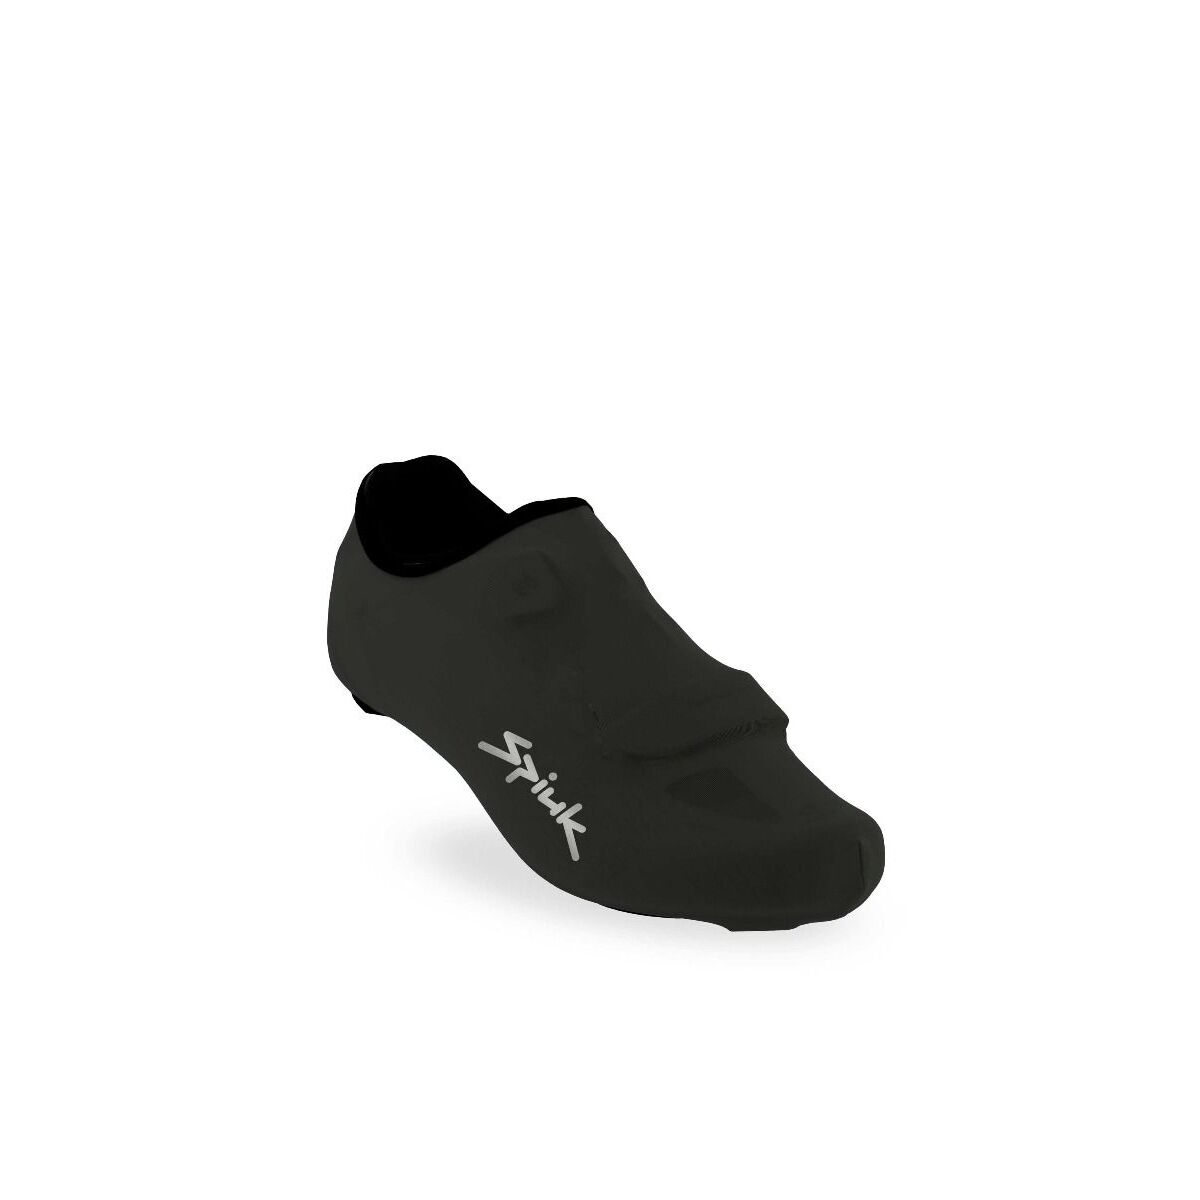 Photo Couvre-chaussures lycra Spiuk Anatomic